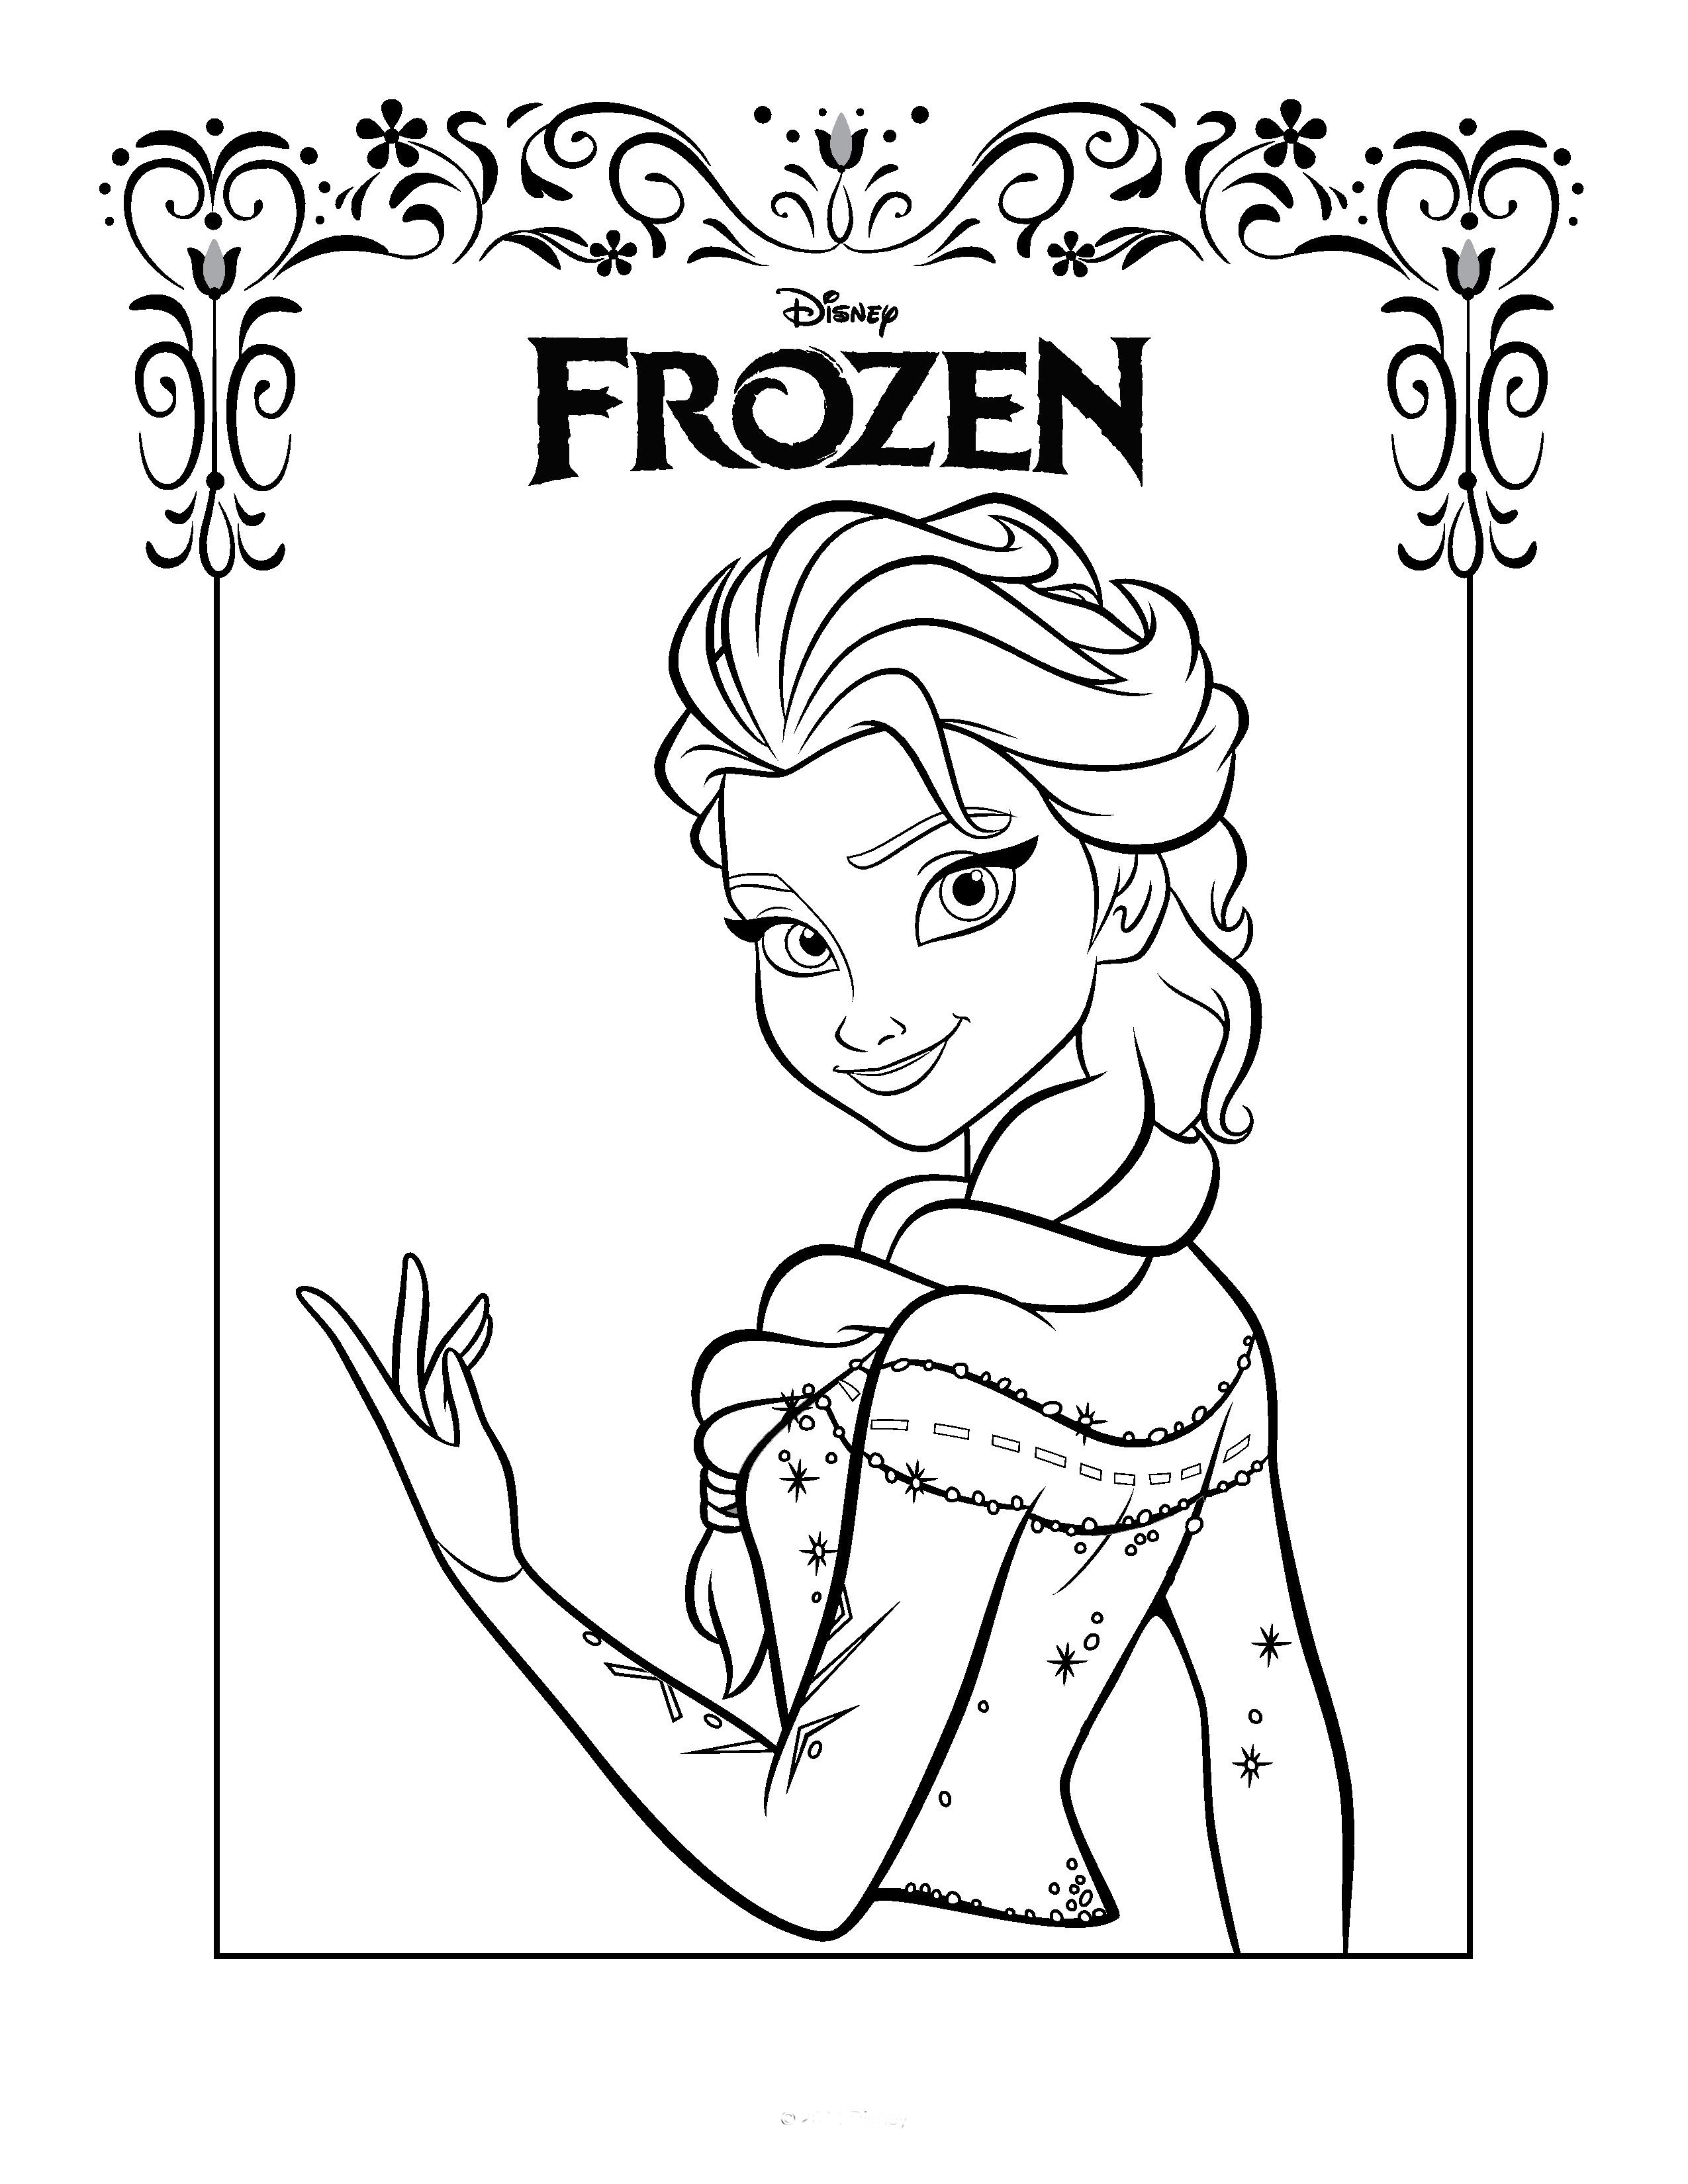 Free Printable Frozen Coloring Pages For Kids - Best Coloring Pages - Free Printable Frozen Coloring Pages